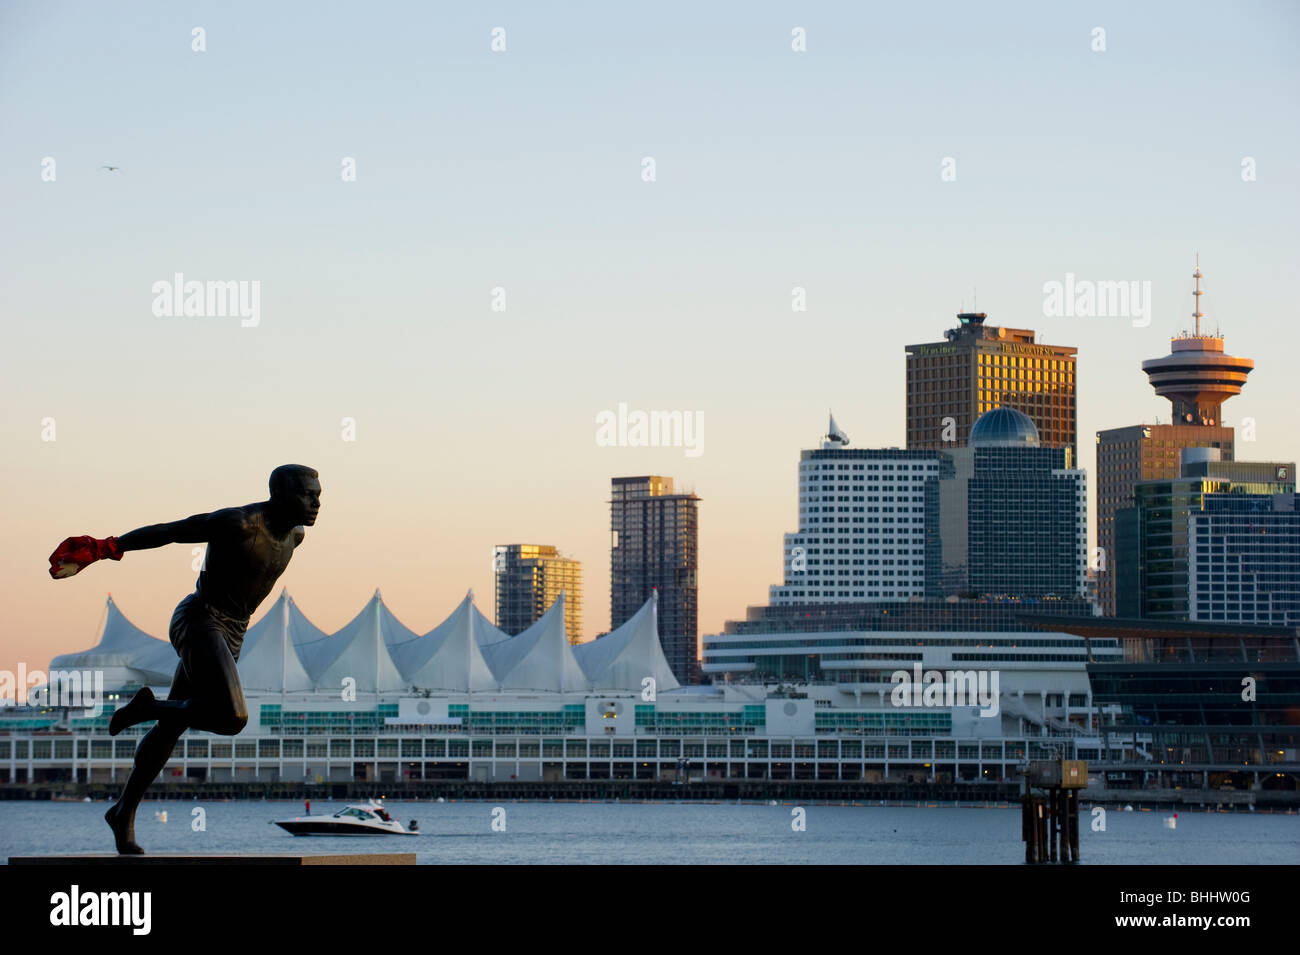 Statue of Olympic runner Harry Jerome in Vancouver's Stanley Park with the city skyline in the background. Stock Photo